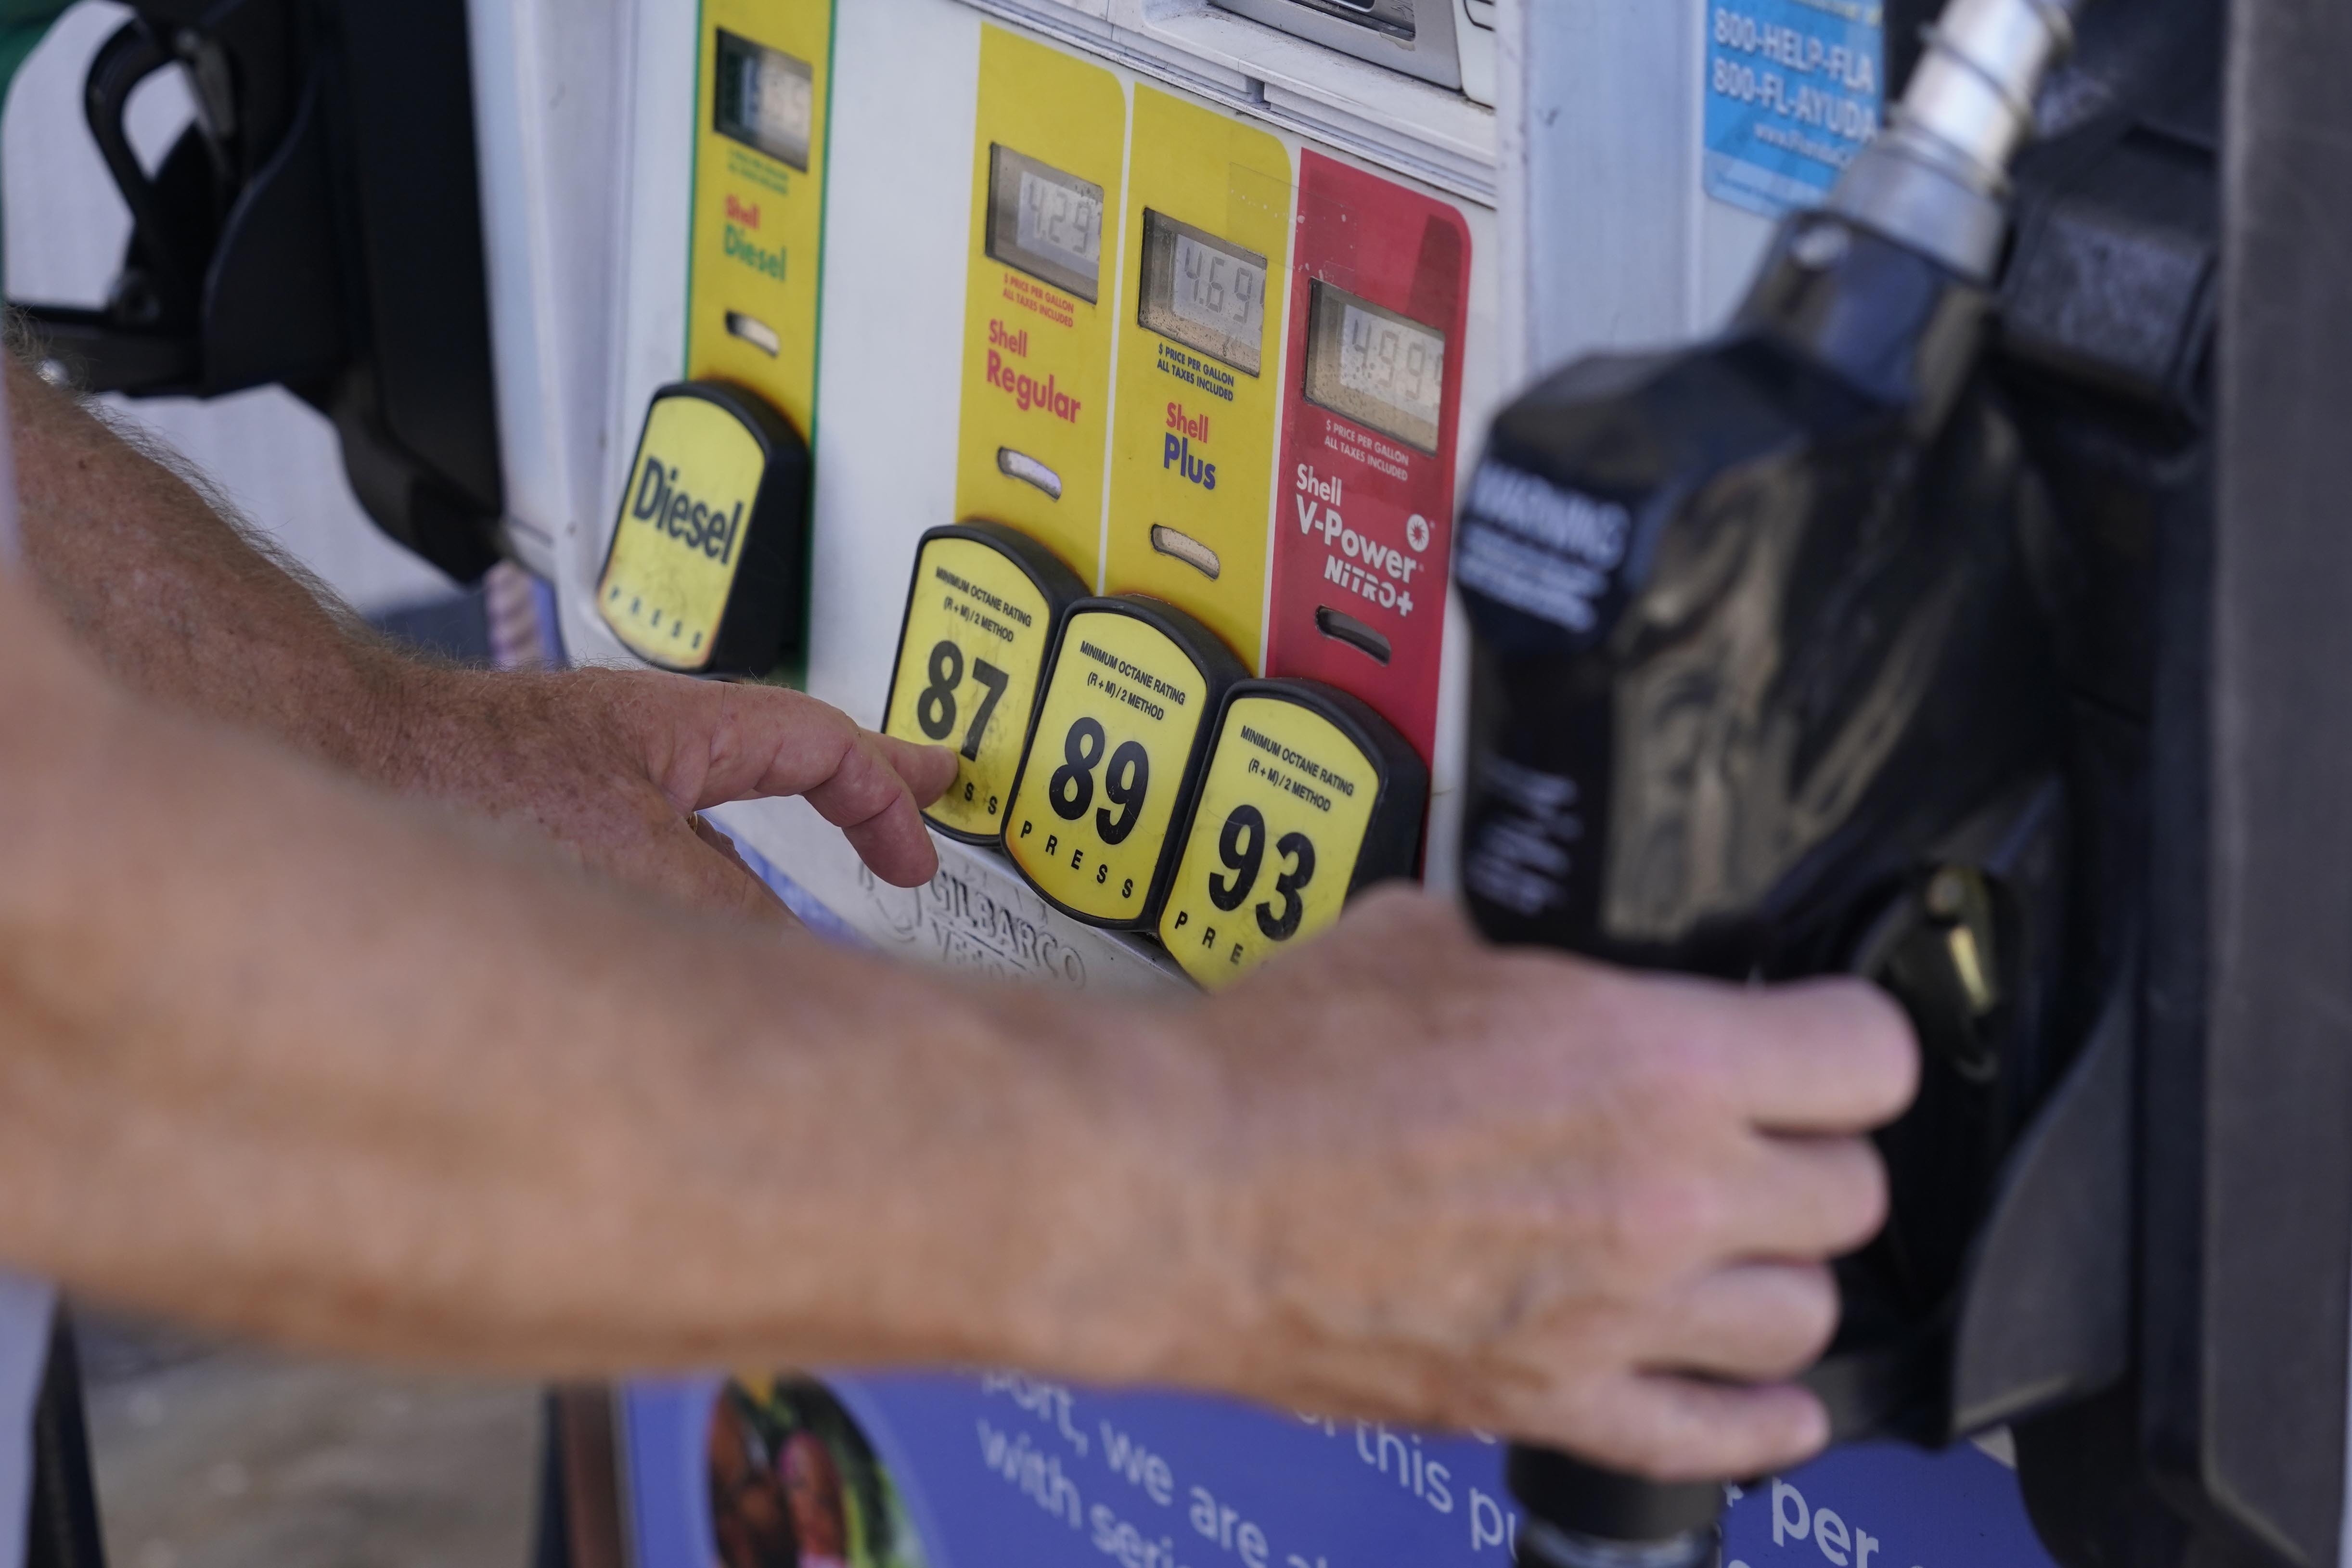 77 NJ gas stations drop prices in one-day campaign to
overturn state’s self-serve ban